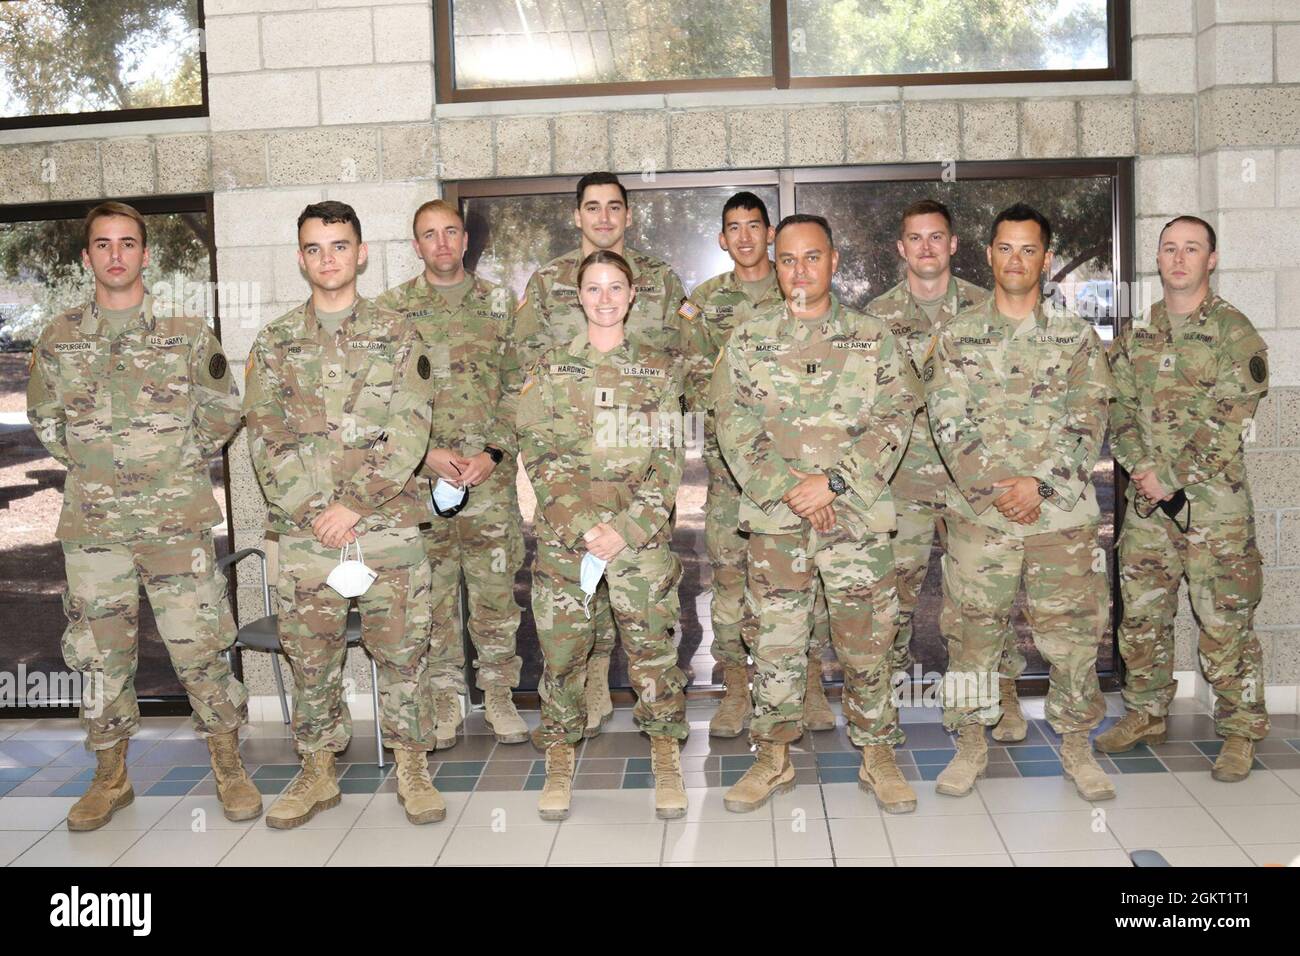 Members of Weed Army Community Hospital and 1st Battalion, 144th Field Artillery Regiment of the California Army National Guard, pose for a photograph June 24 at the Dr. Mary E. Walker Center on Fort Irwin, Calif. following a COVID-19 vaccination event. Medical personnel with 1st Bn., 144th FA Regt. augmented the COVID-19 vaccine event hosted by Weed Army Community Hospital. Stock Photo